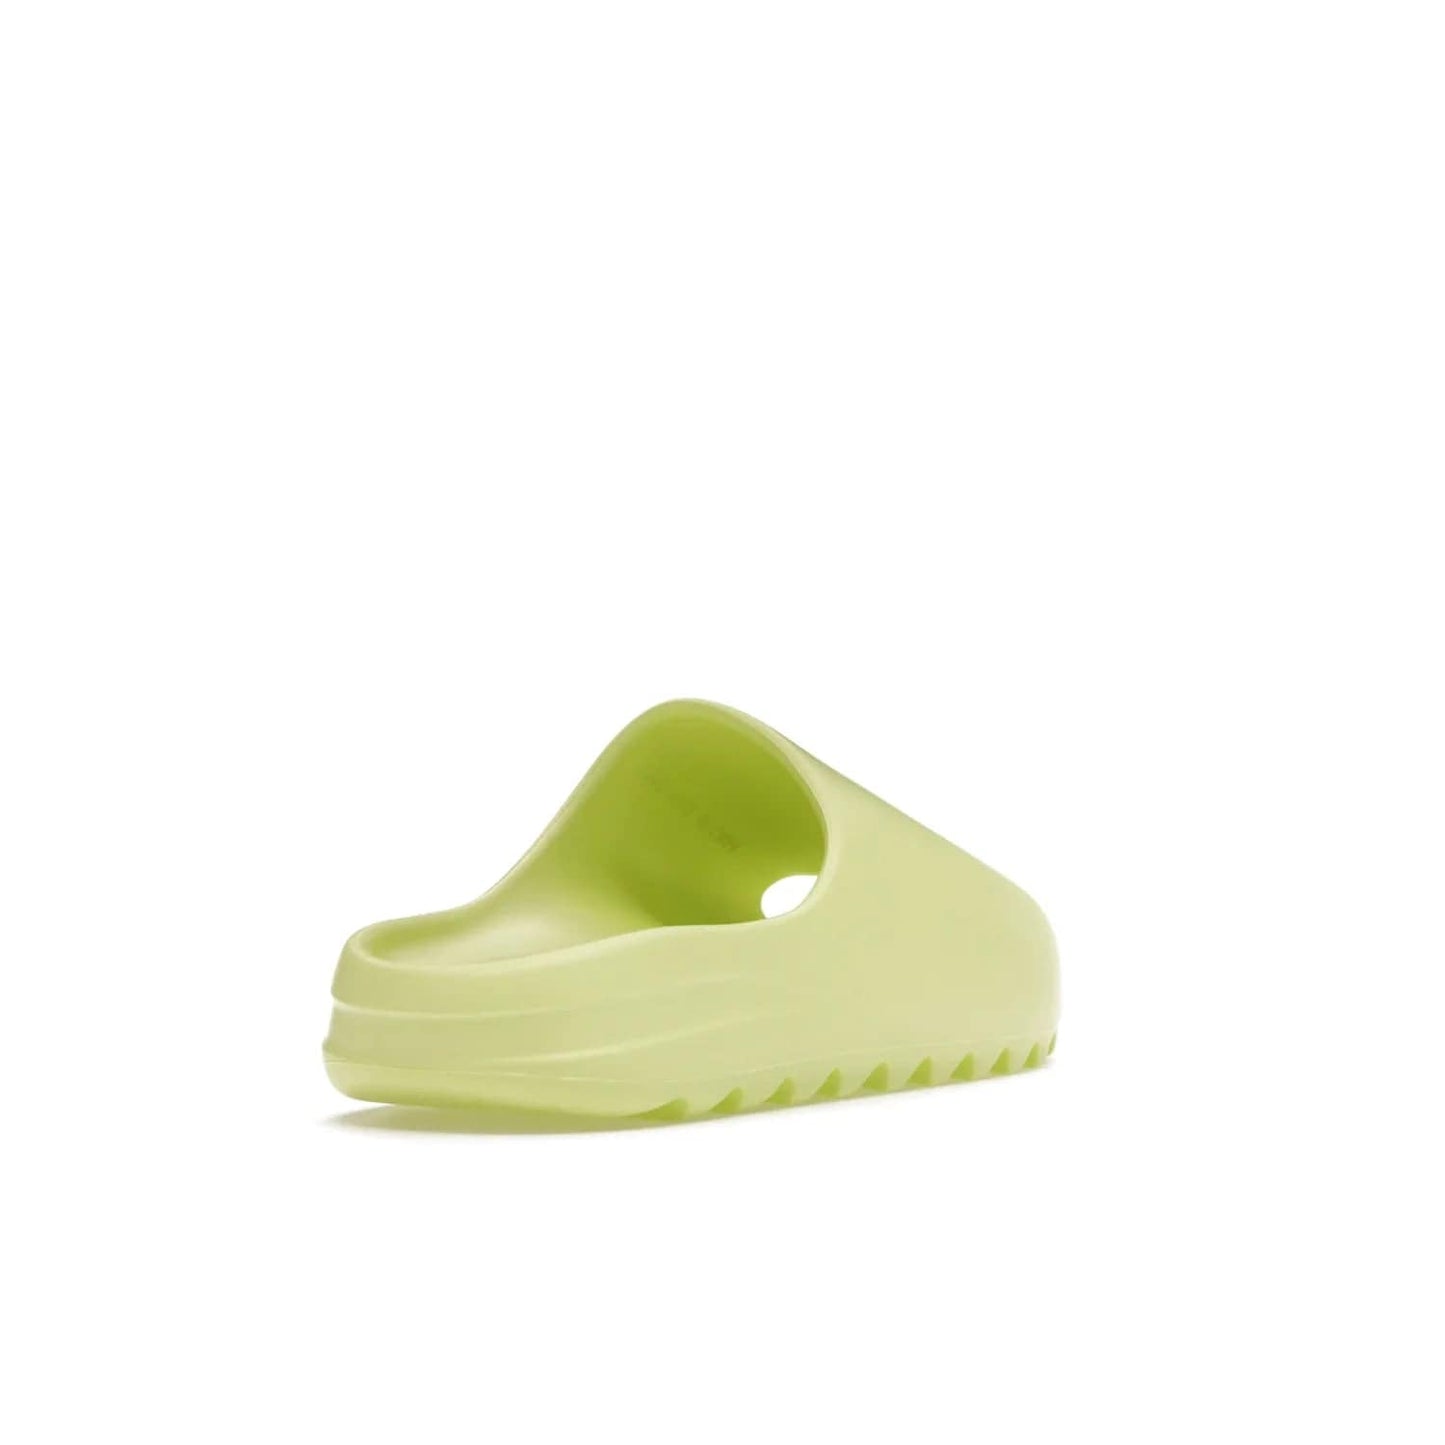 adidas Yeezy Slide Glow Green - Image 31 - Only at www.BallersClubKickz.com - Experience an unexpected summer style with the adidas Yeezy Slide Glow Green. This limited edition slide sandal provides a lightweight and durable construction and a bold Glow Green hue. Strategic grooves enhance traction and provide all-day comfort. Make a statement with the adidas Yeezy Slide Glow Green.